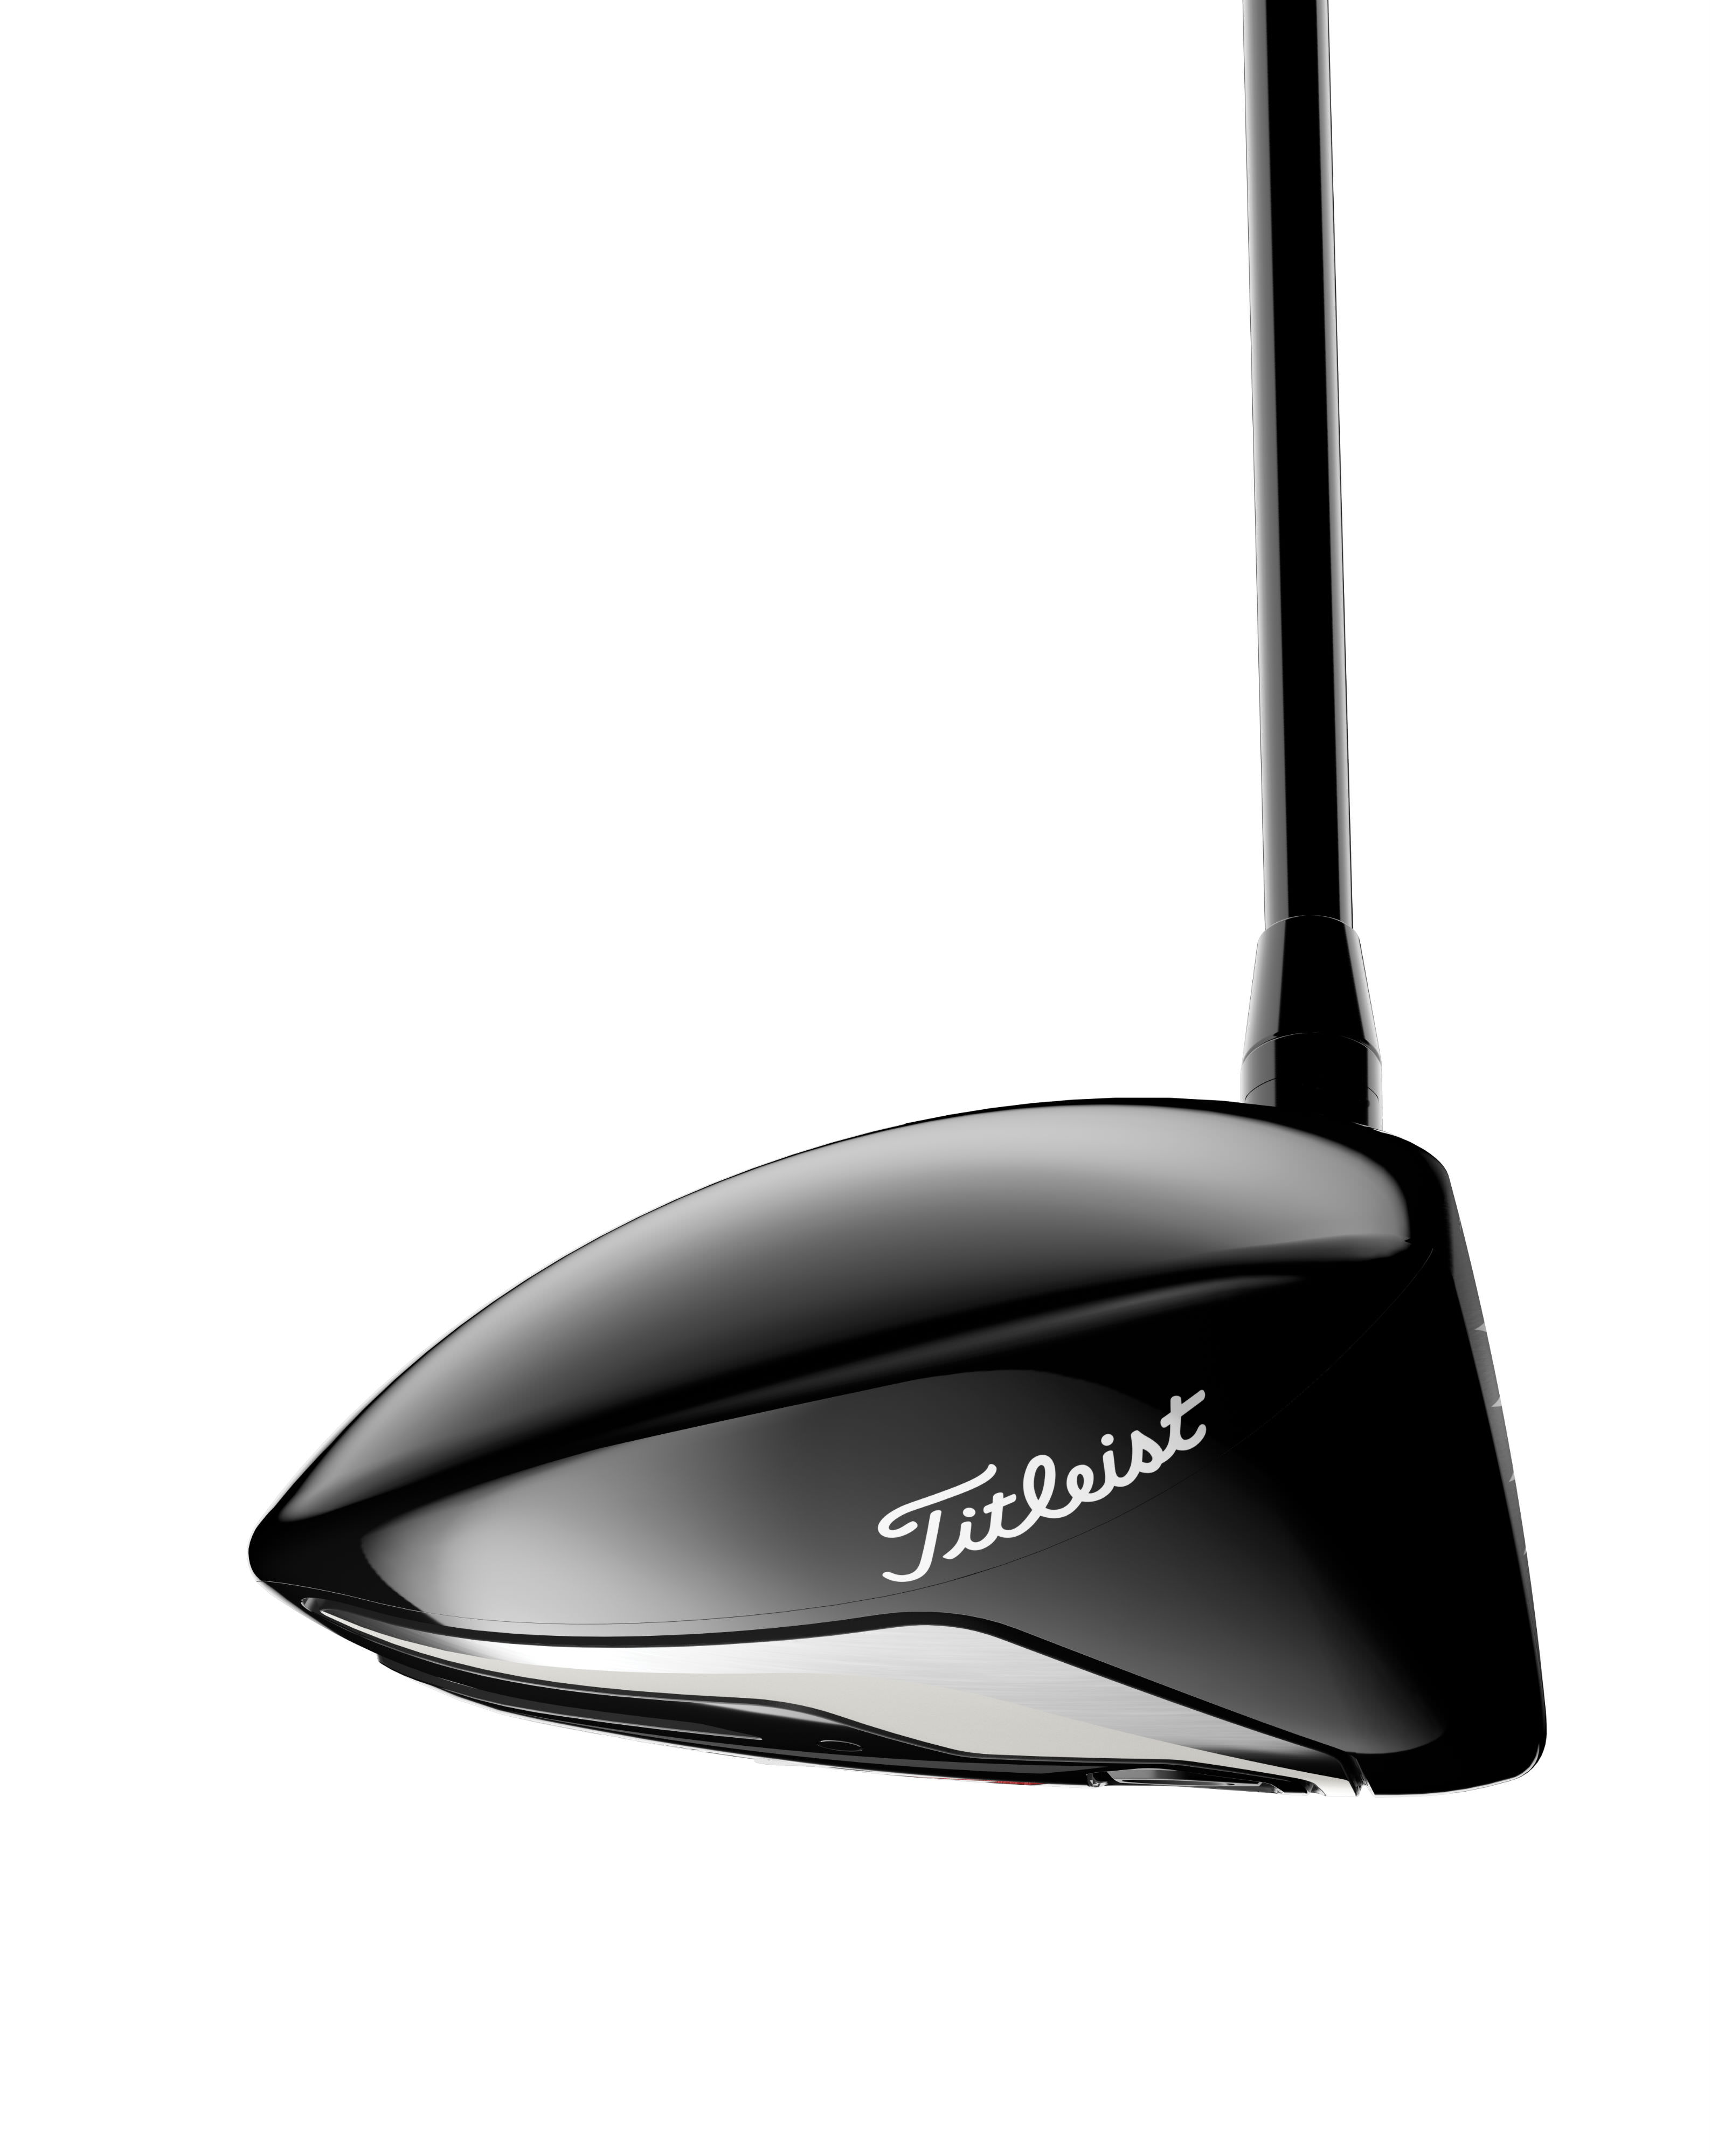 Titleist TS4 Driver Review